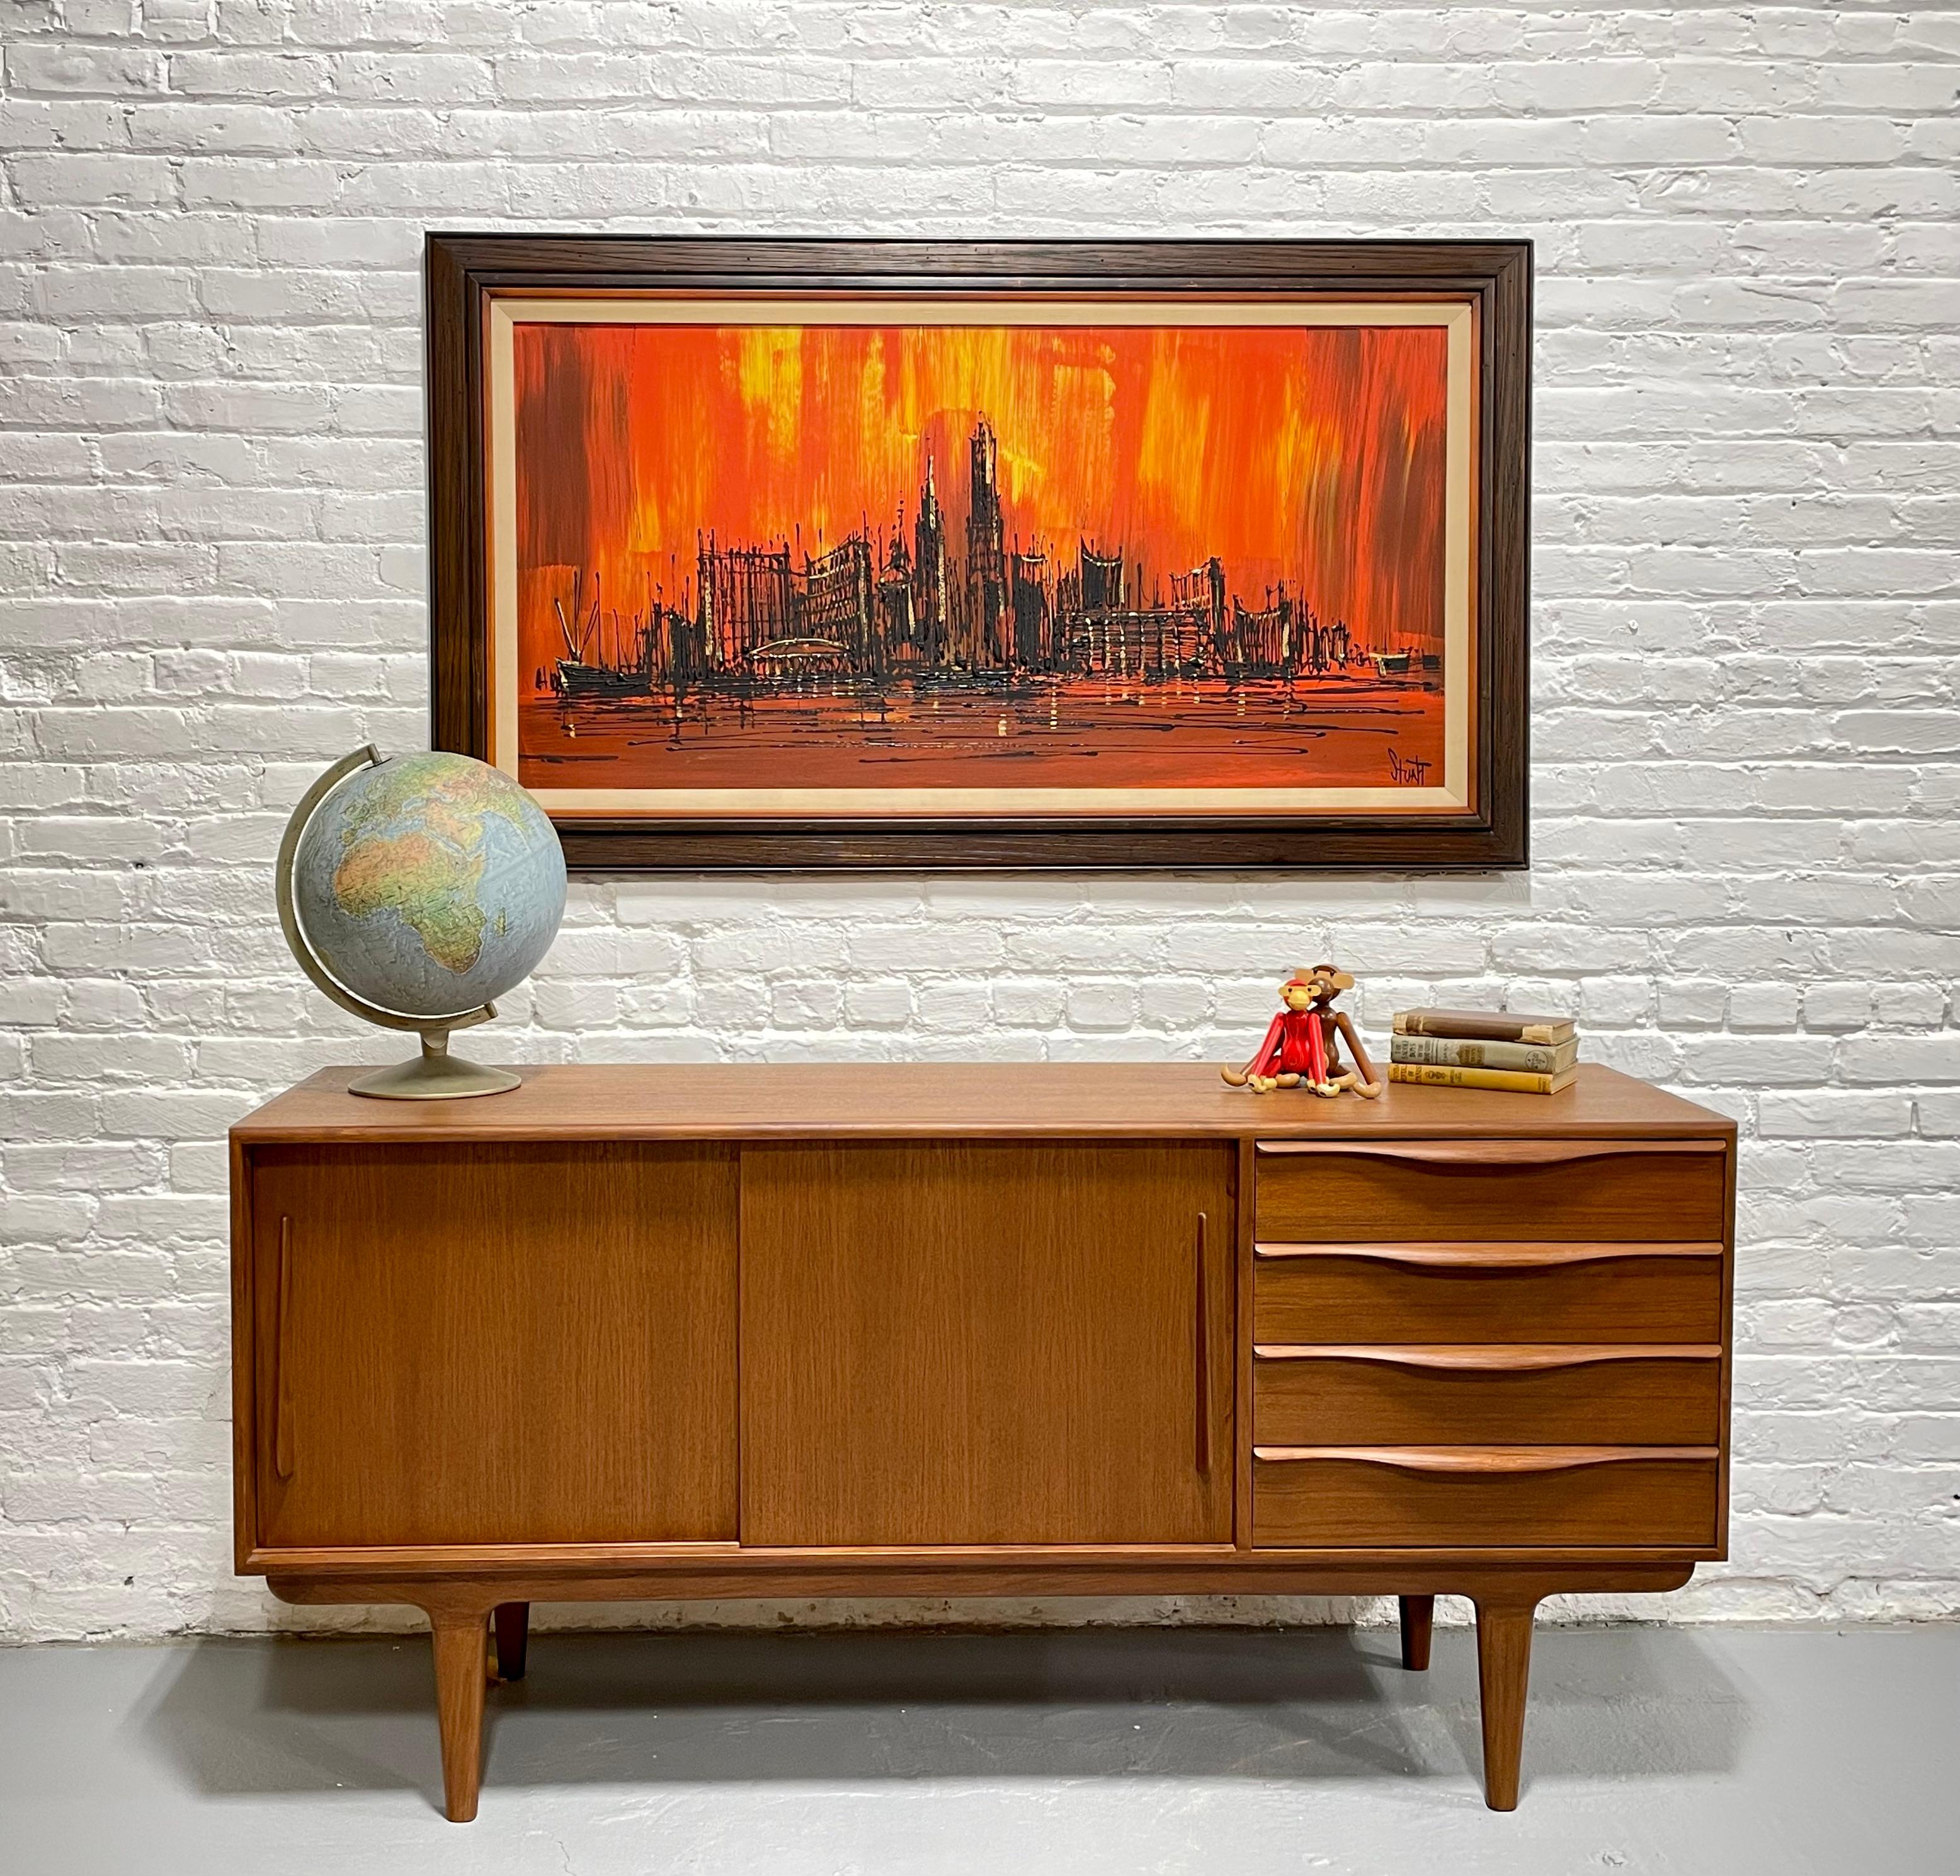 Large framed Mid Century Modern Skyline Artwork.  Acrylic on masonite with some metallic gold pigment. Vibrant orange and red. Signed Stuart lower right, with label affixed to the back, Vanguard Studios. Hanging hardware affixed to the back, ready